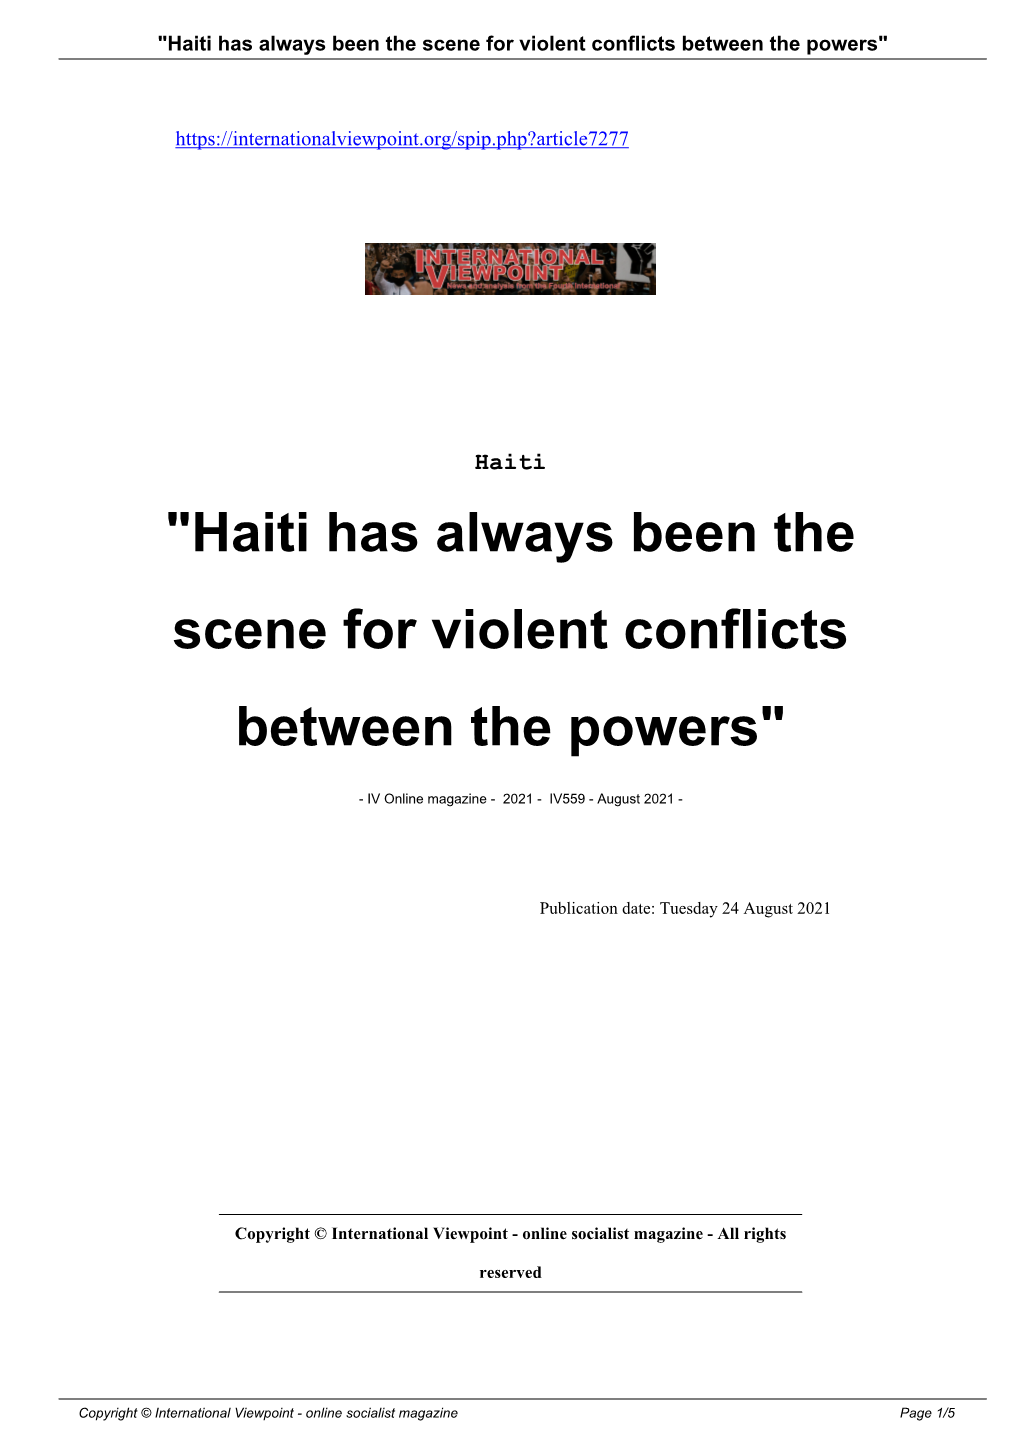 Haiti Has Always Been the Scene for Violent Conflicts Between the Powers"